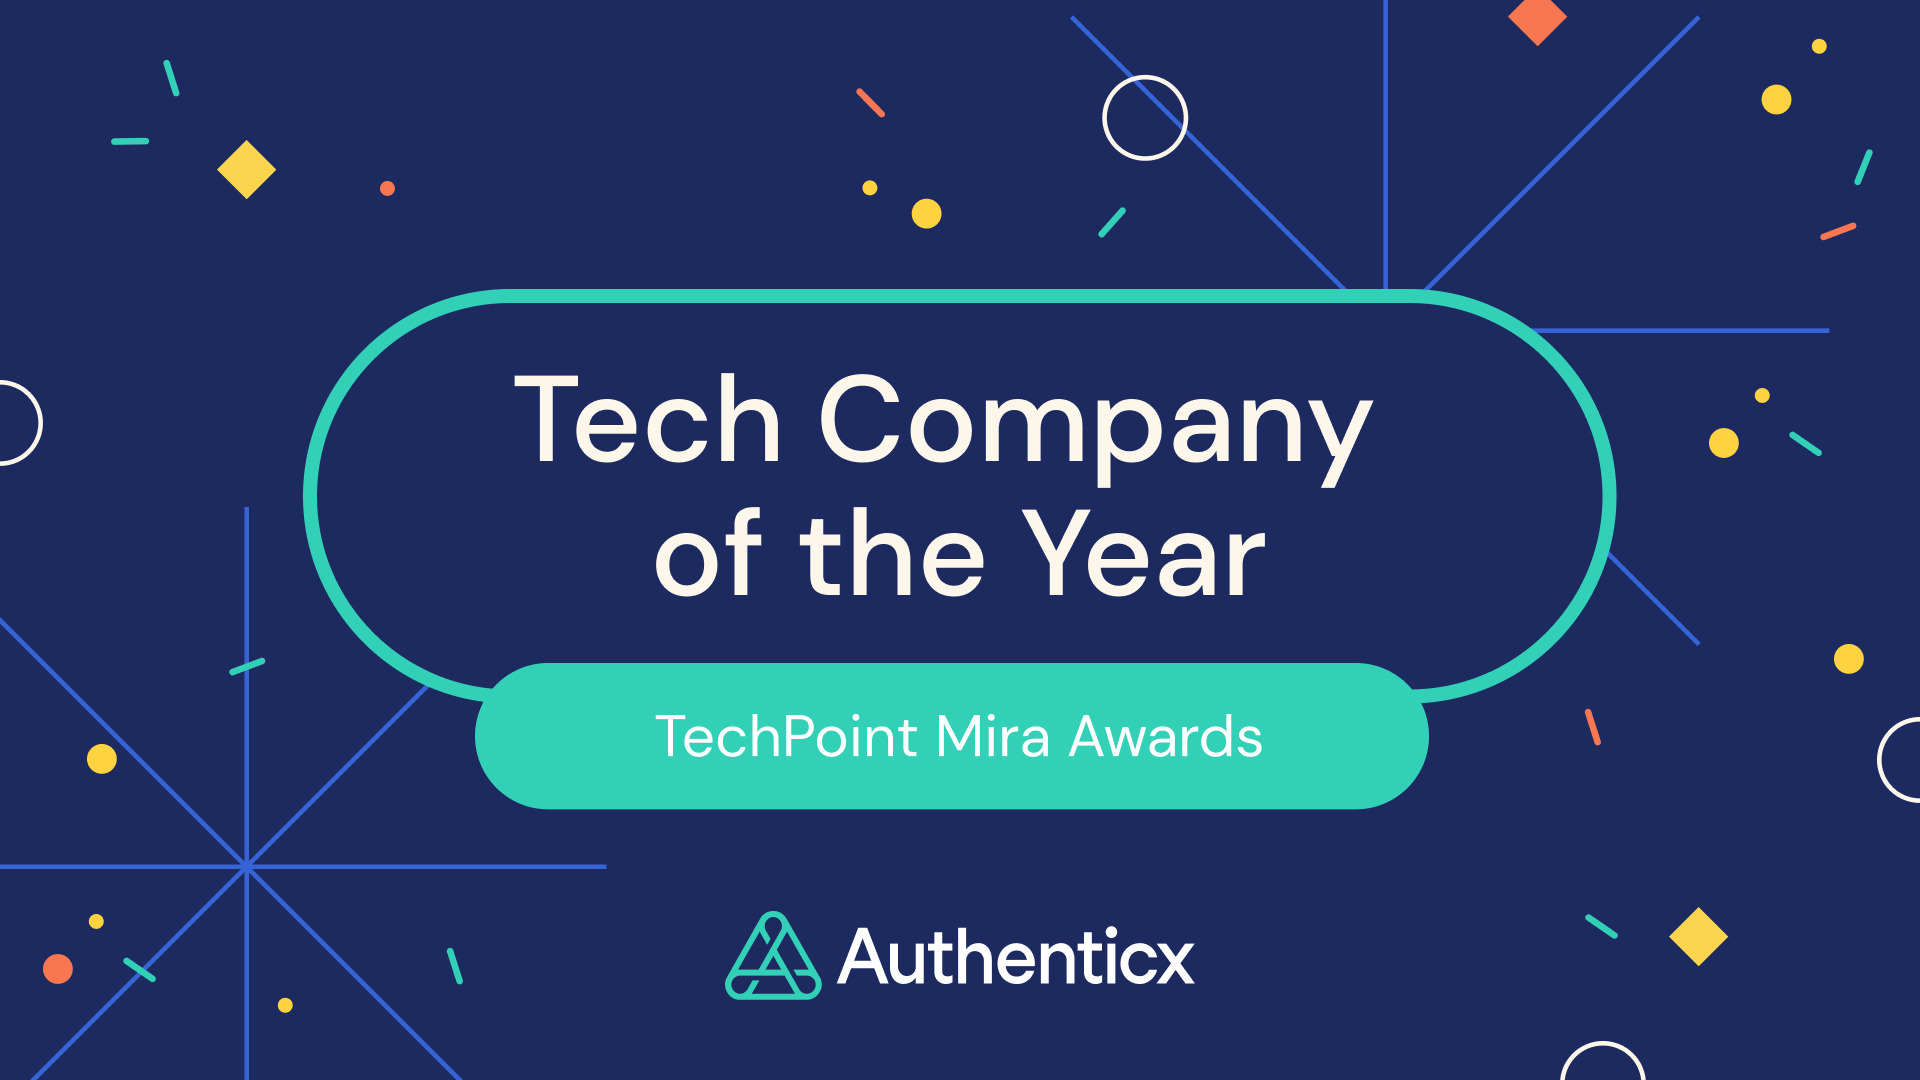 TechPoint Mira Awards | Tech Company of the Year | Authenticx